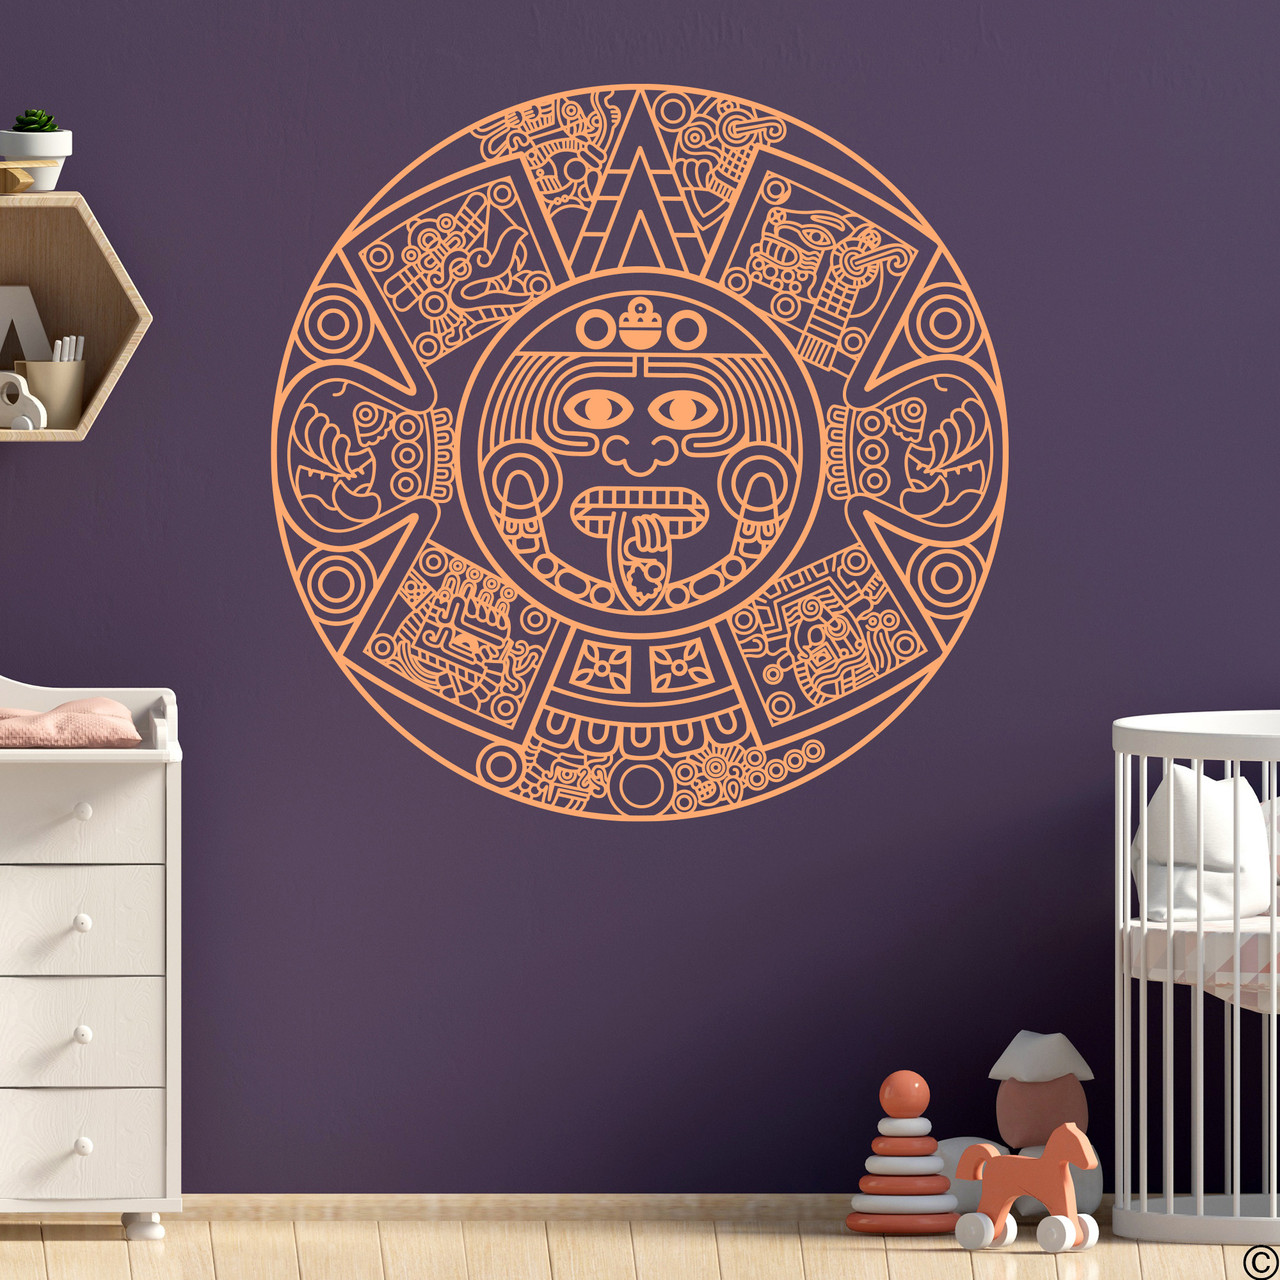 The Aztec Calendar wall decal in limited edition apricot vinyl color.